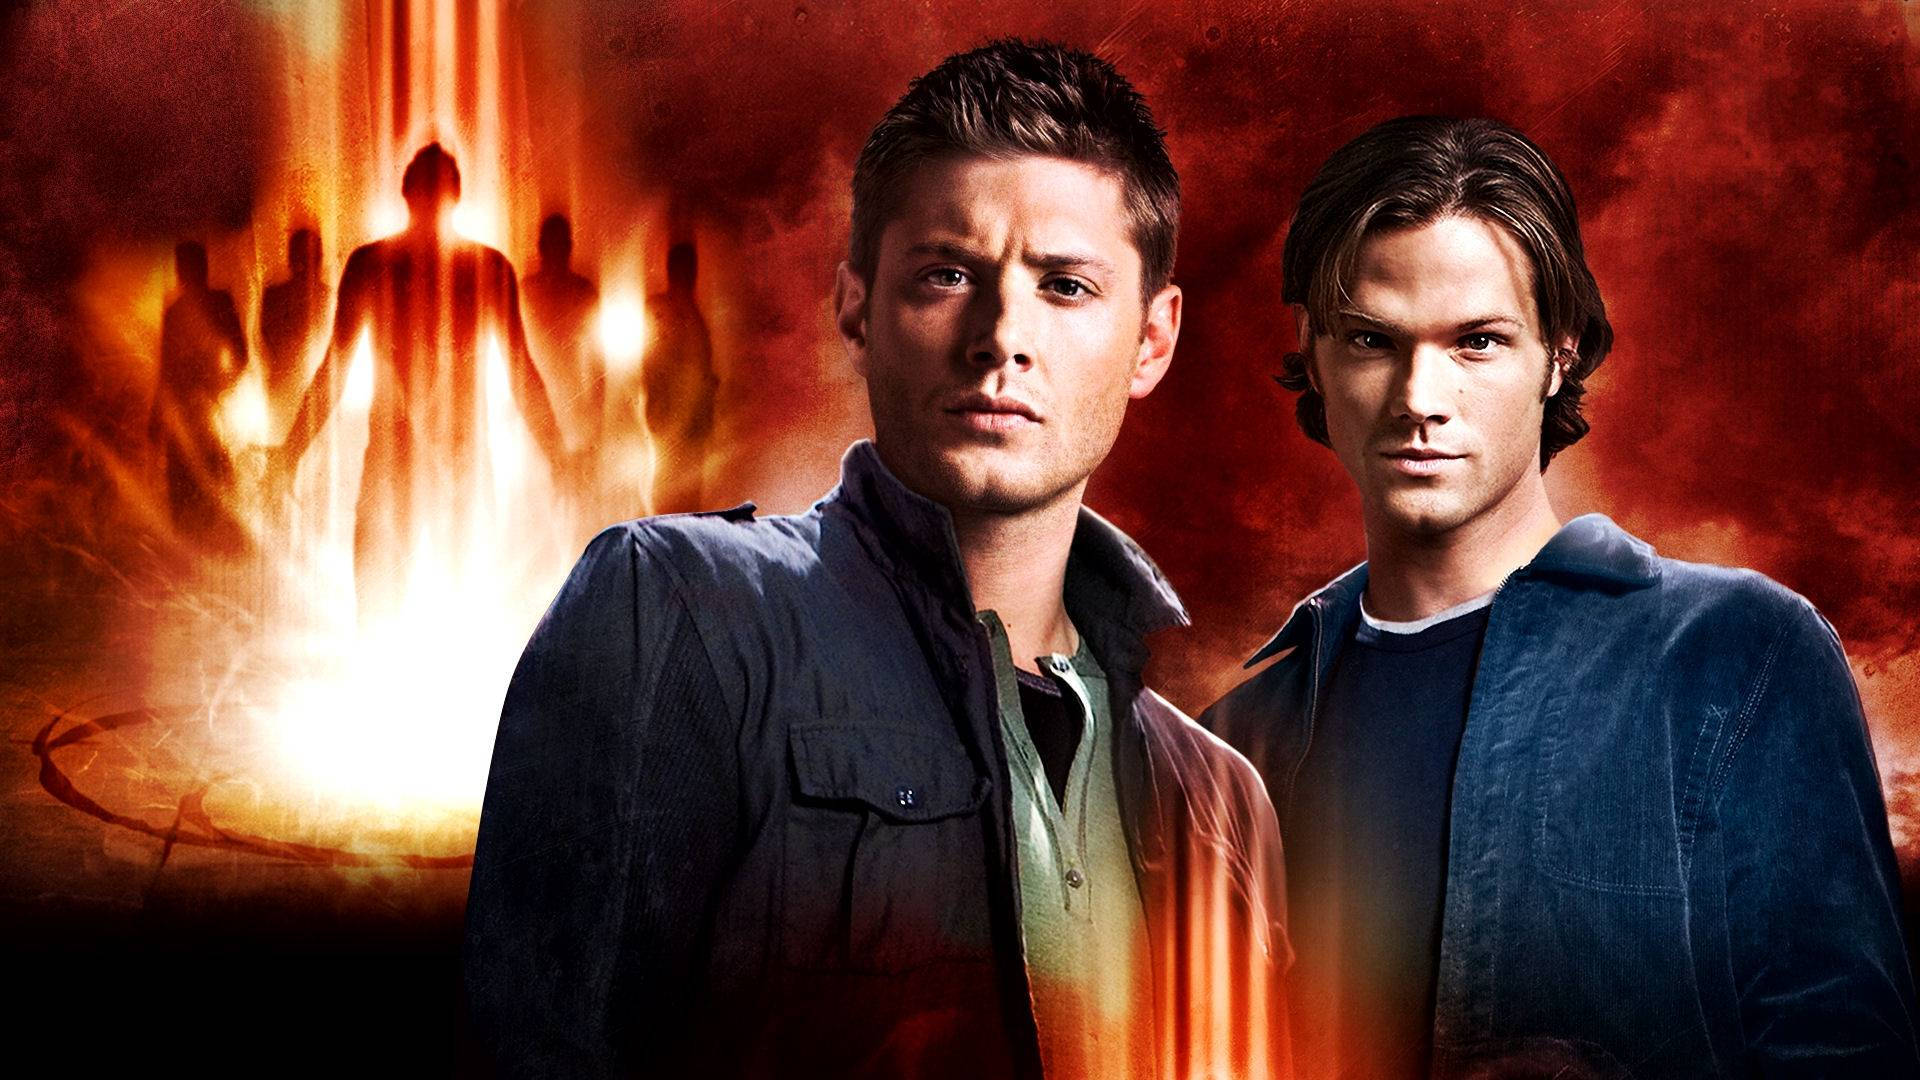 Brothers Forever - Sam and Dean Winchester stand together in Supernatural. Wallpaper